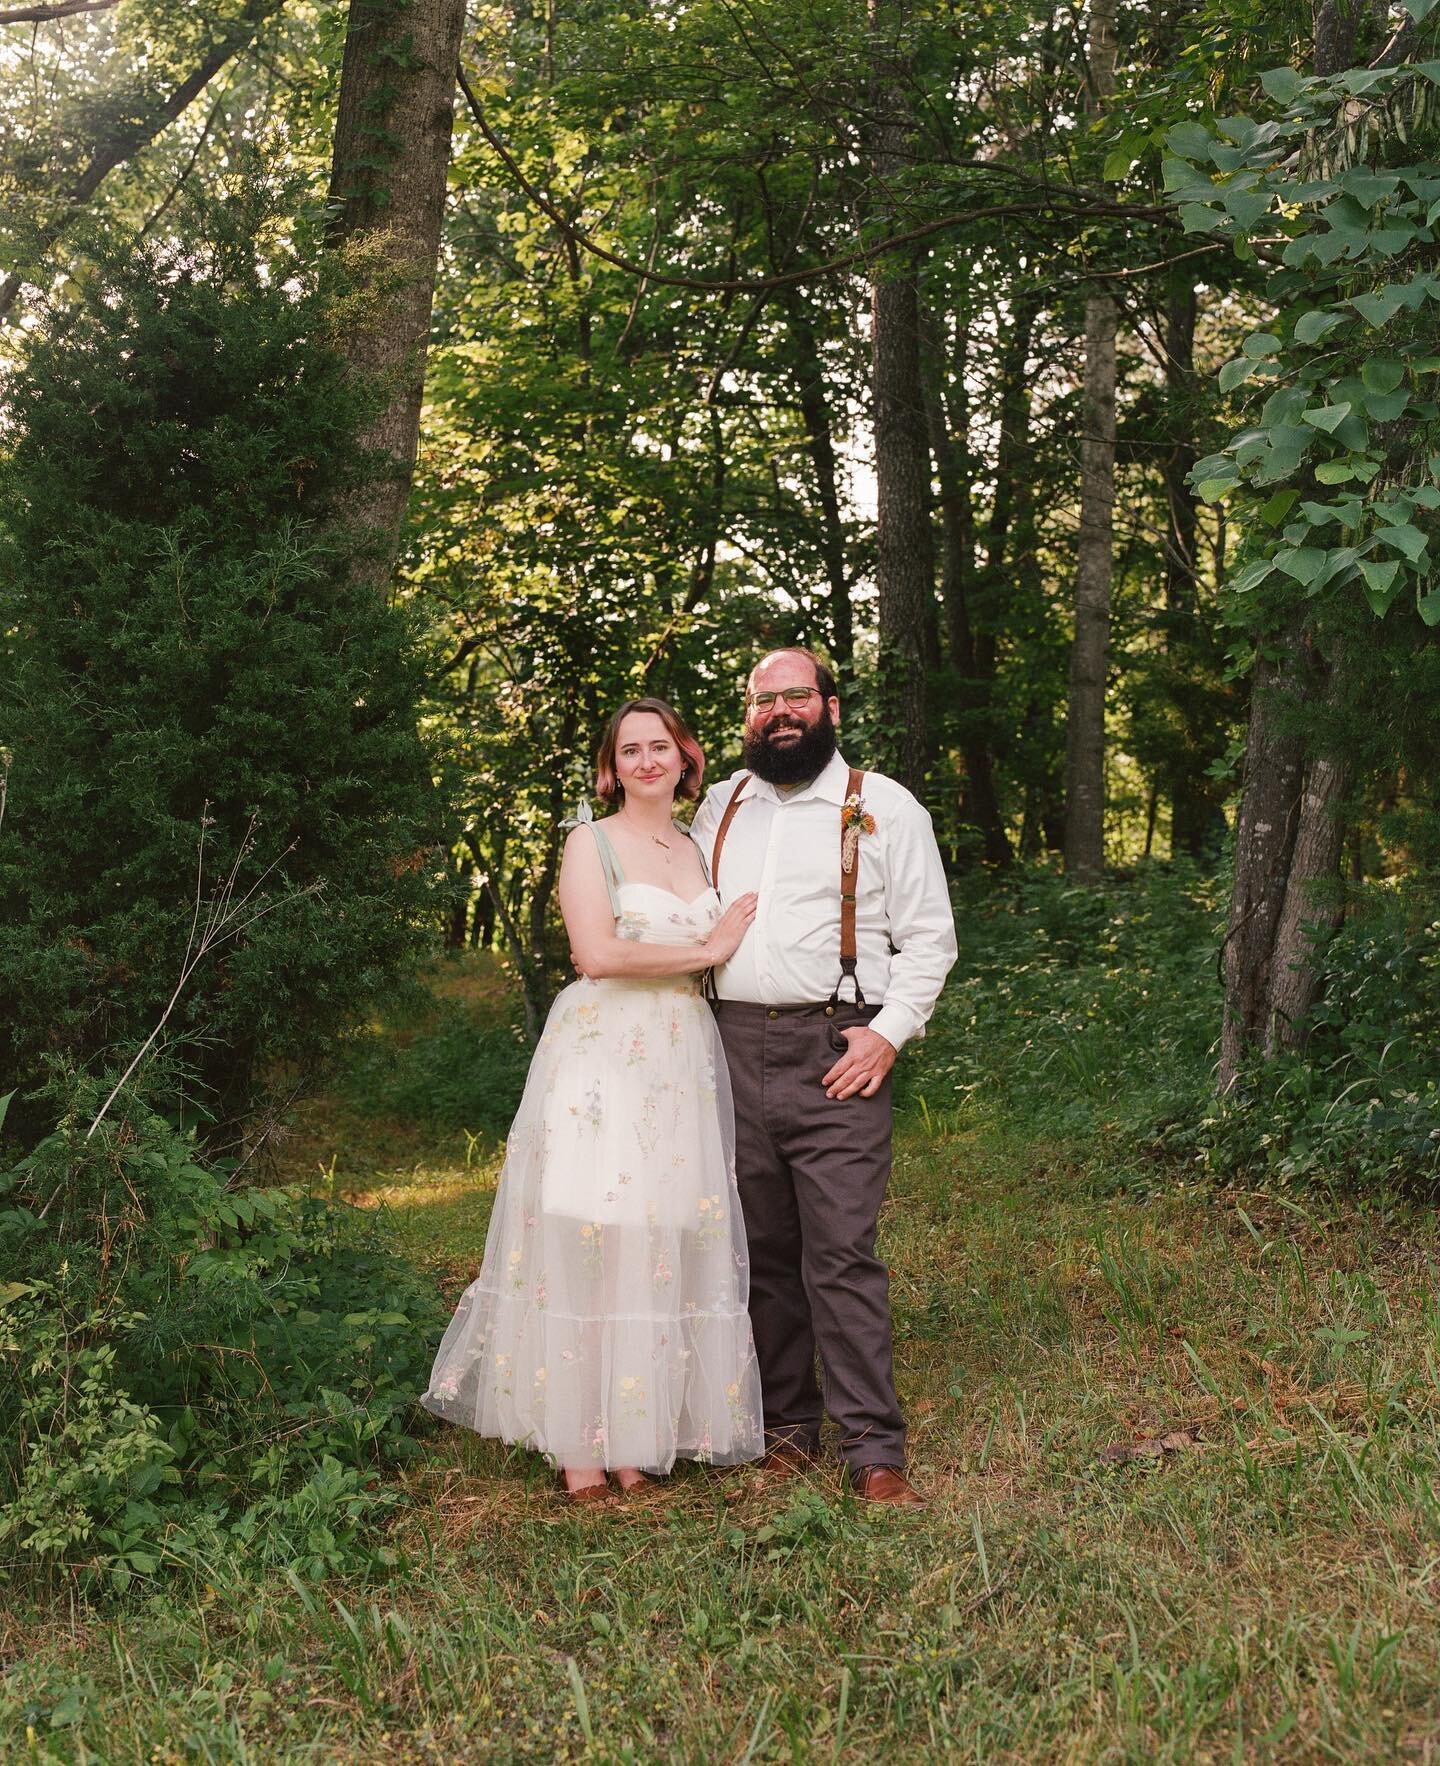 Portraits from Anna + Zach&rsquo;s wedding in Virginia last summer 🌼

Medium format film just before the ceremony.